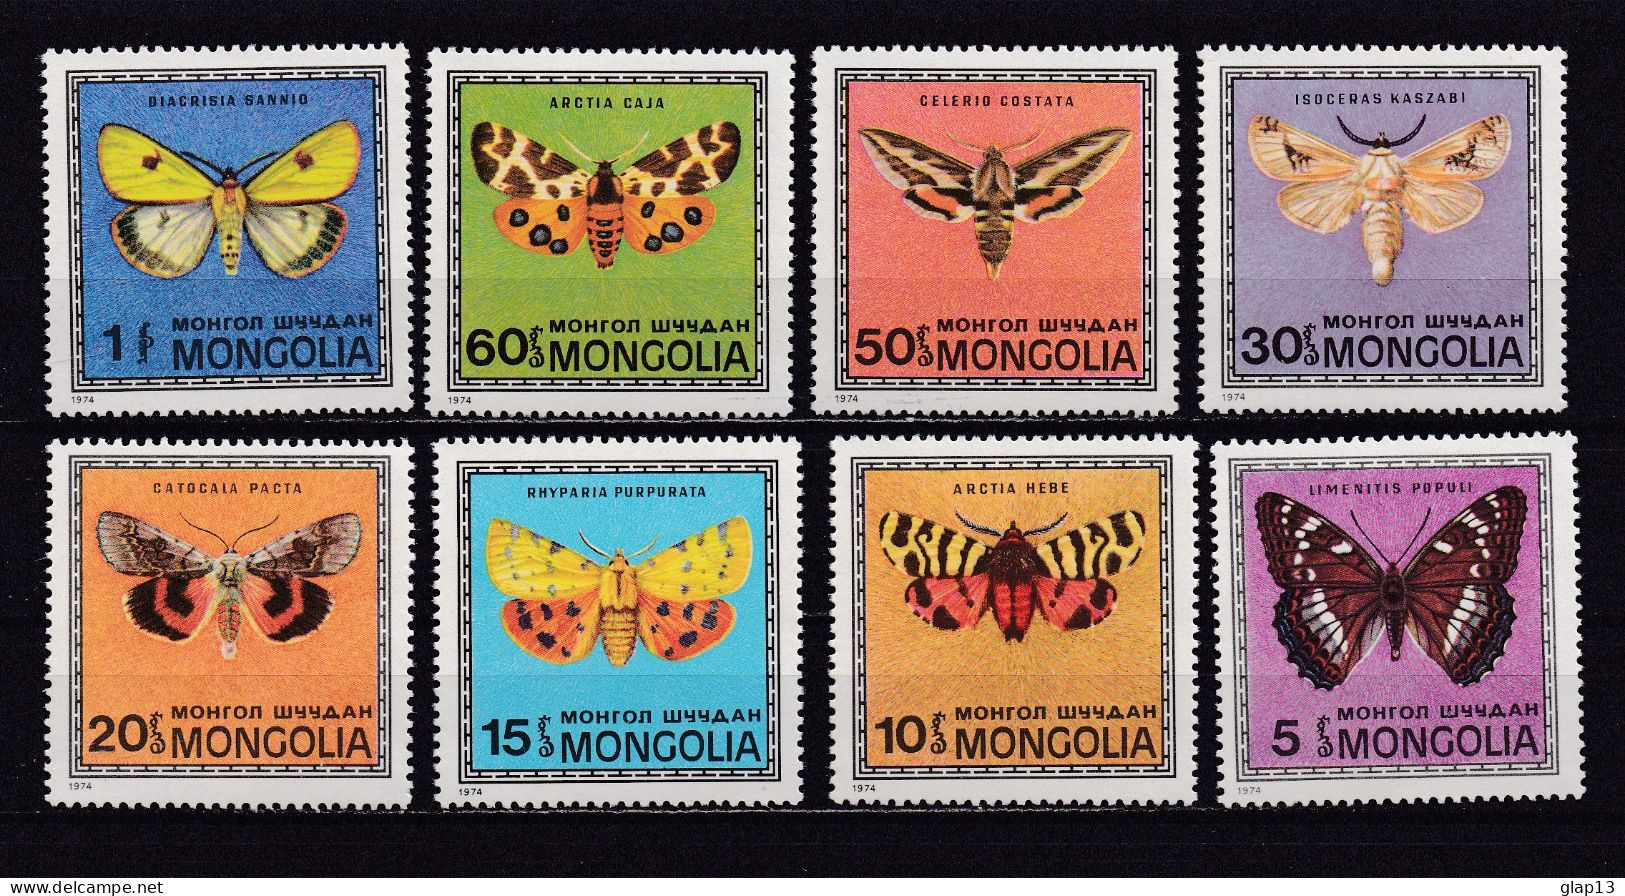 MONGOLIE 1974 TIMBRE N°695/02 NEUF** PAPILLONS - Mongolie